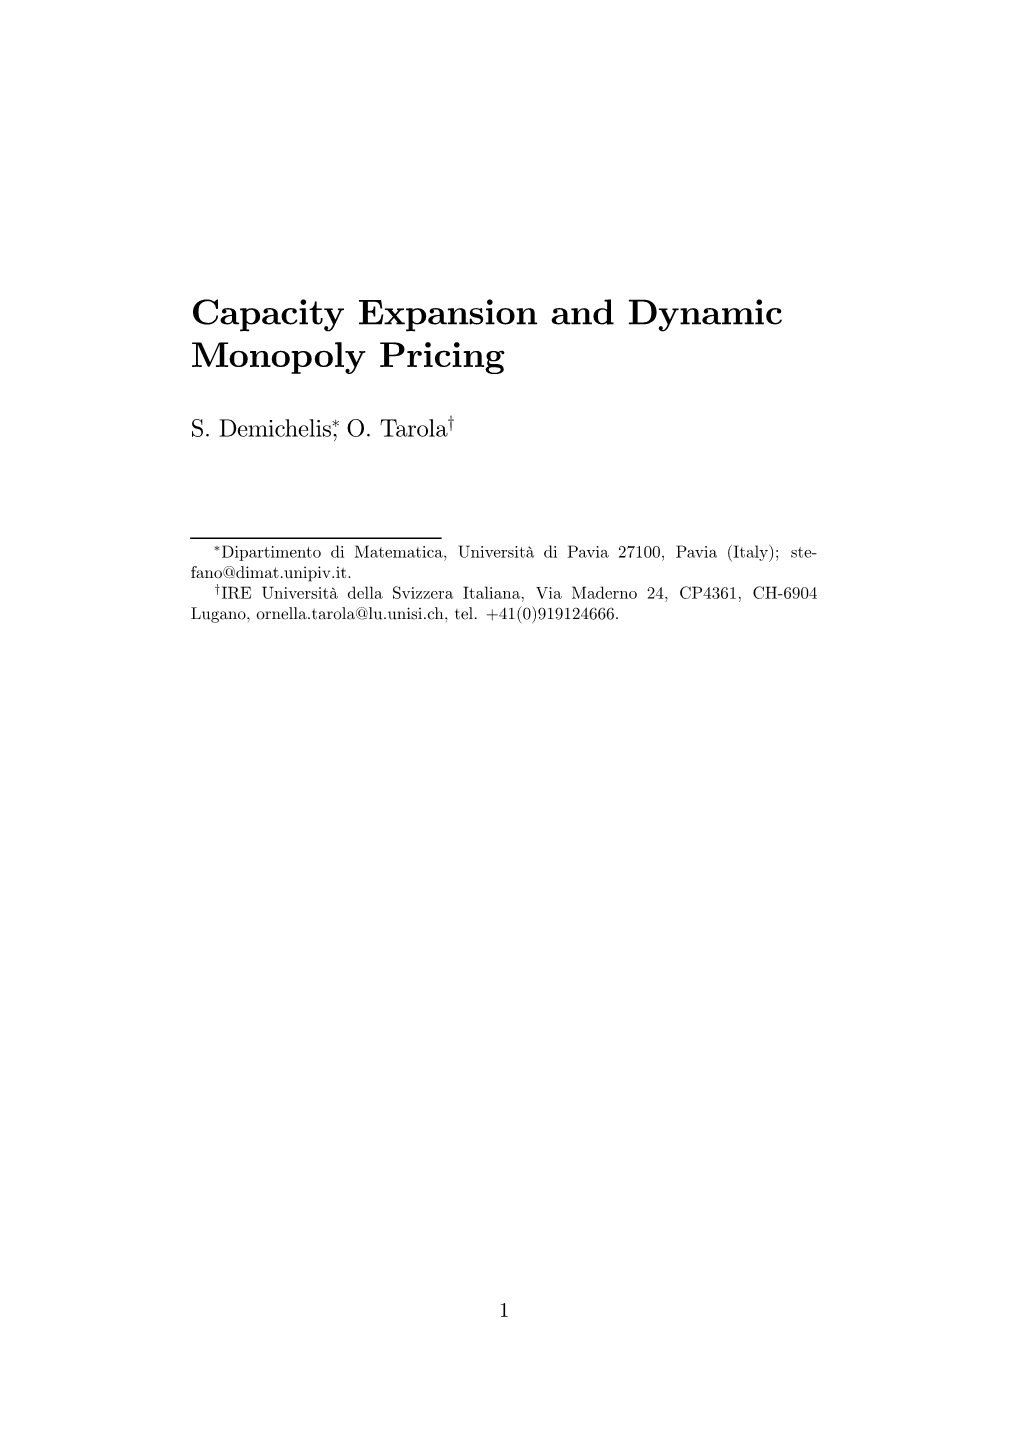 Capacity Expansion and Dynamic Monopoly Pricing